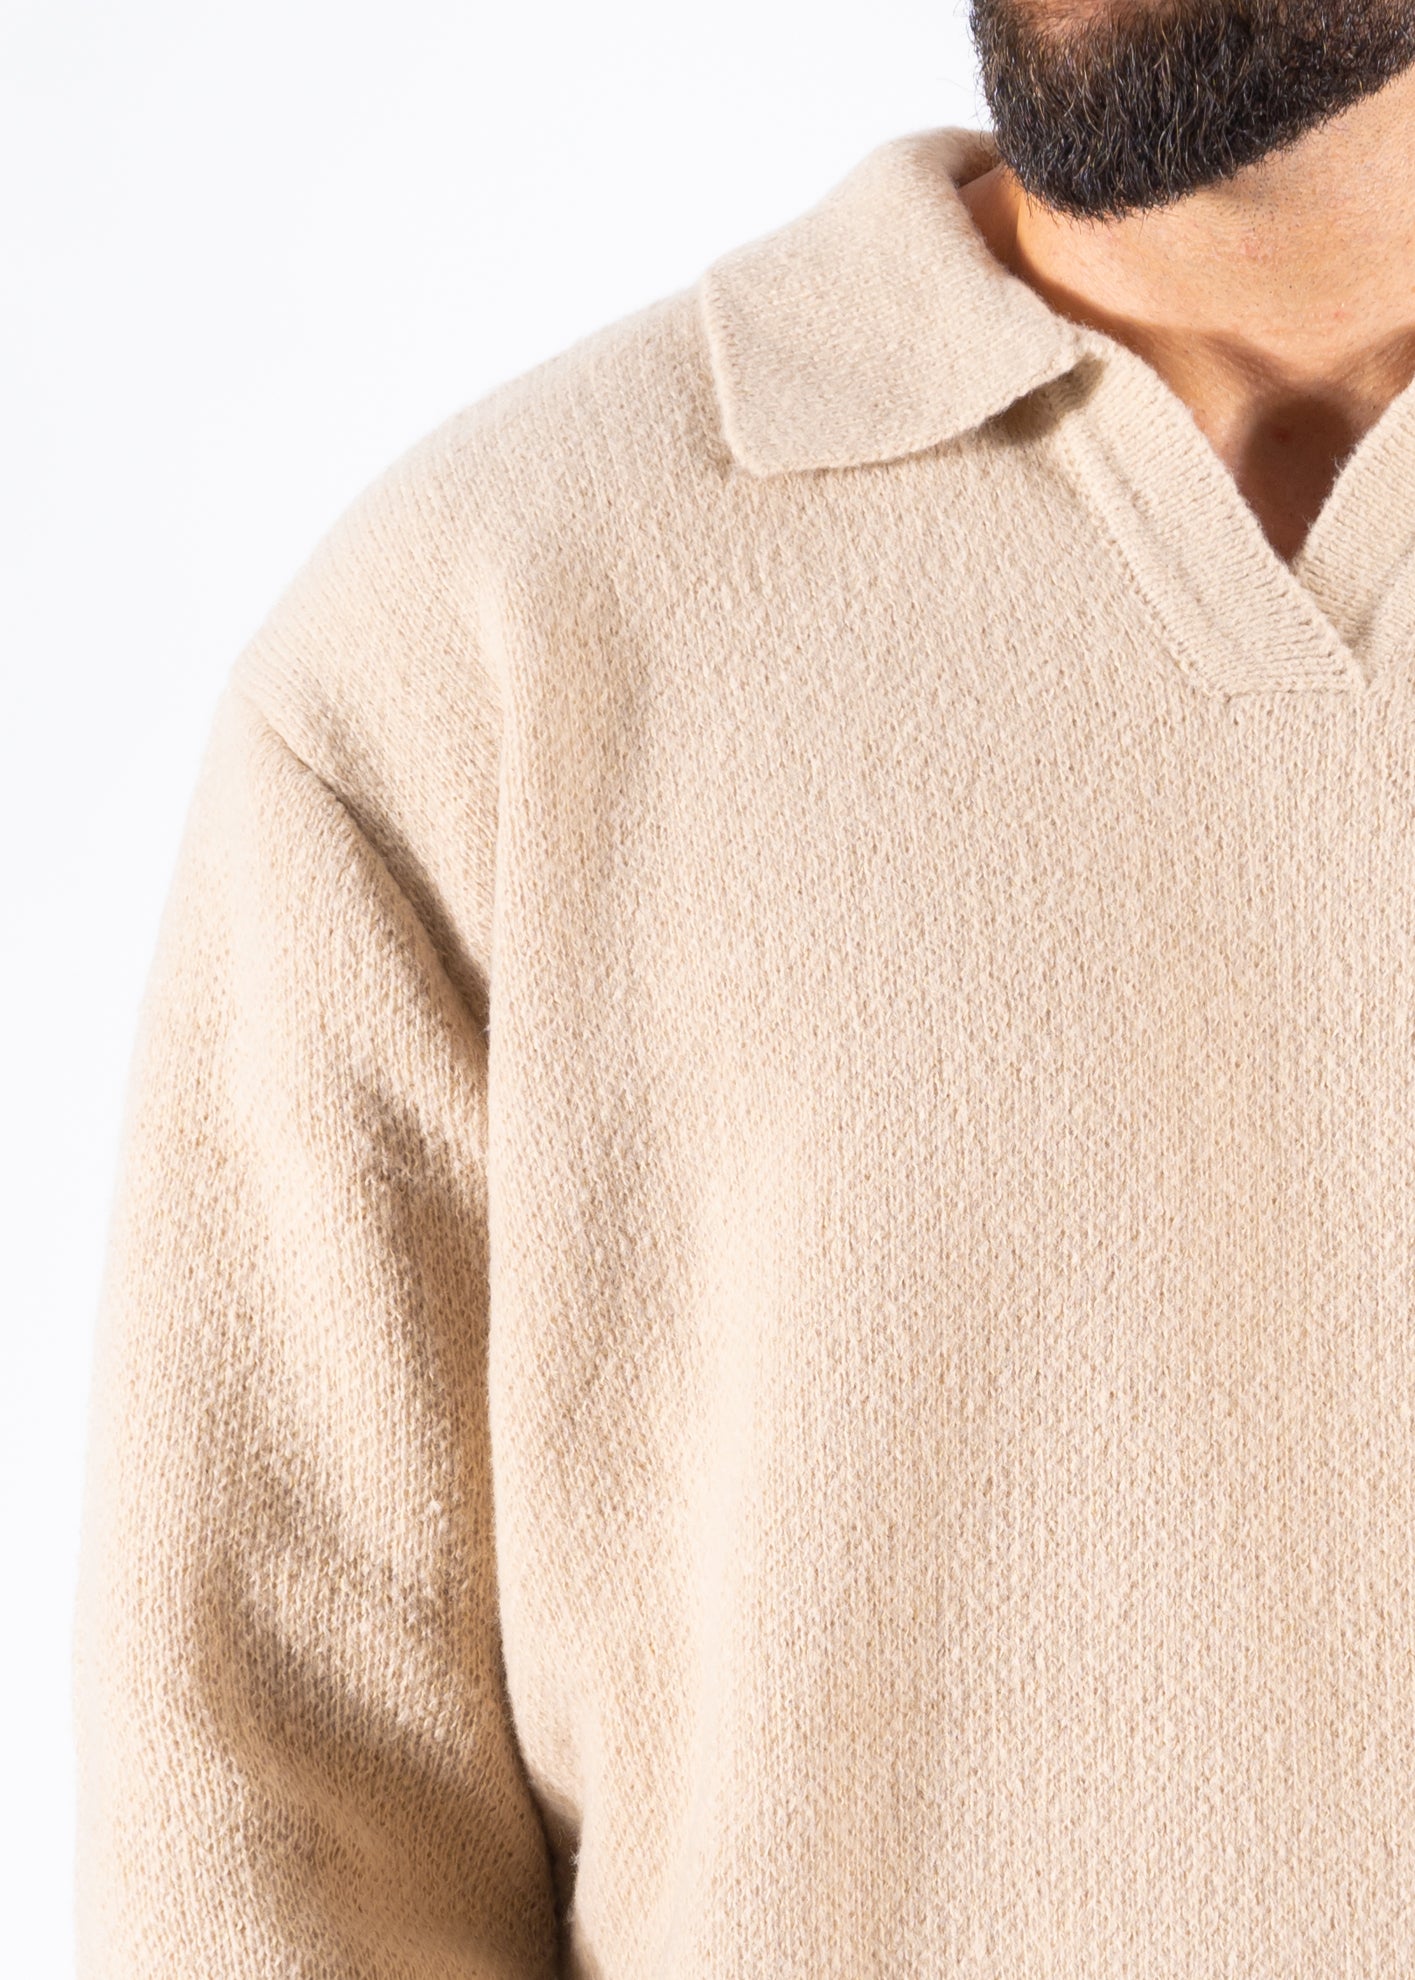 Sweater polo knitted beige oversized